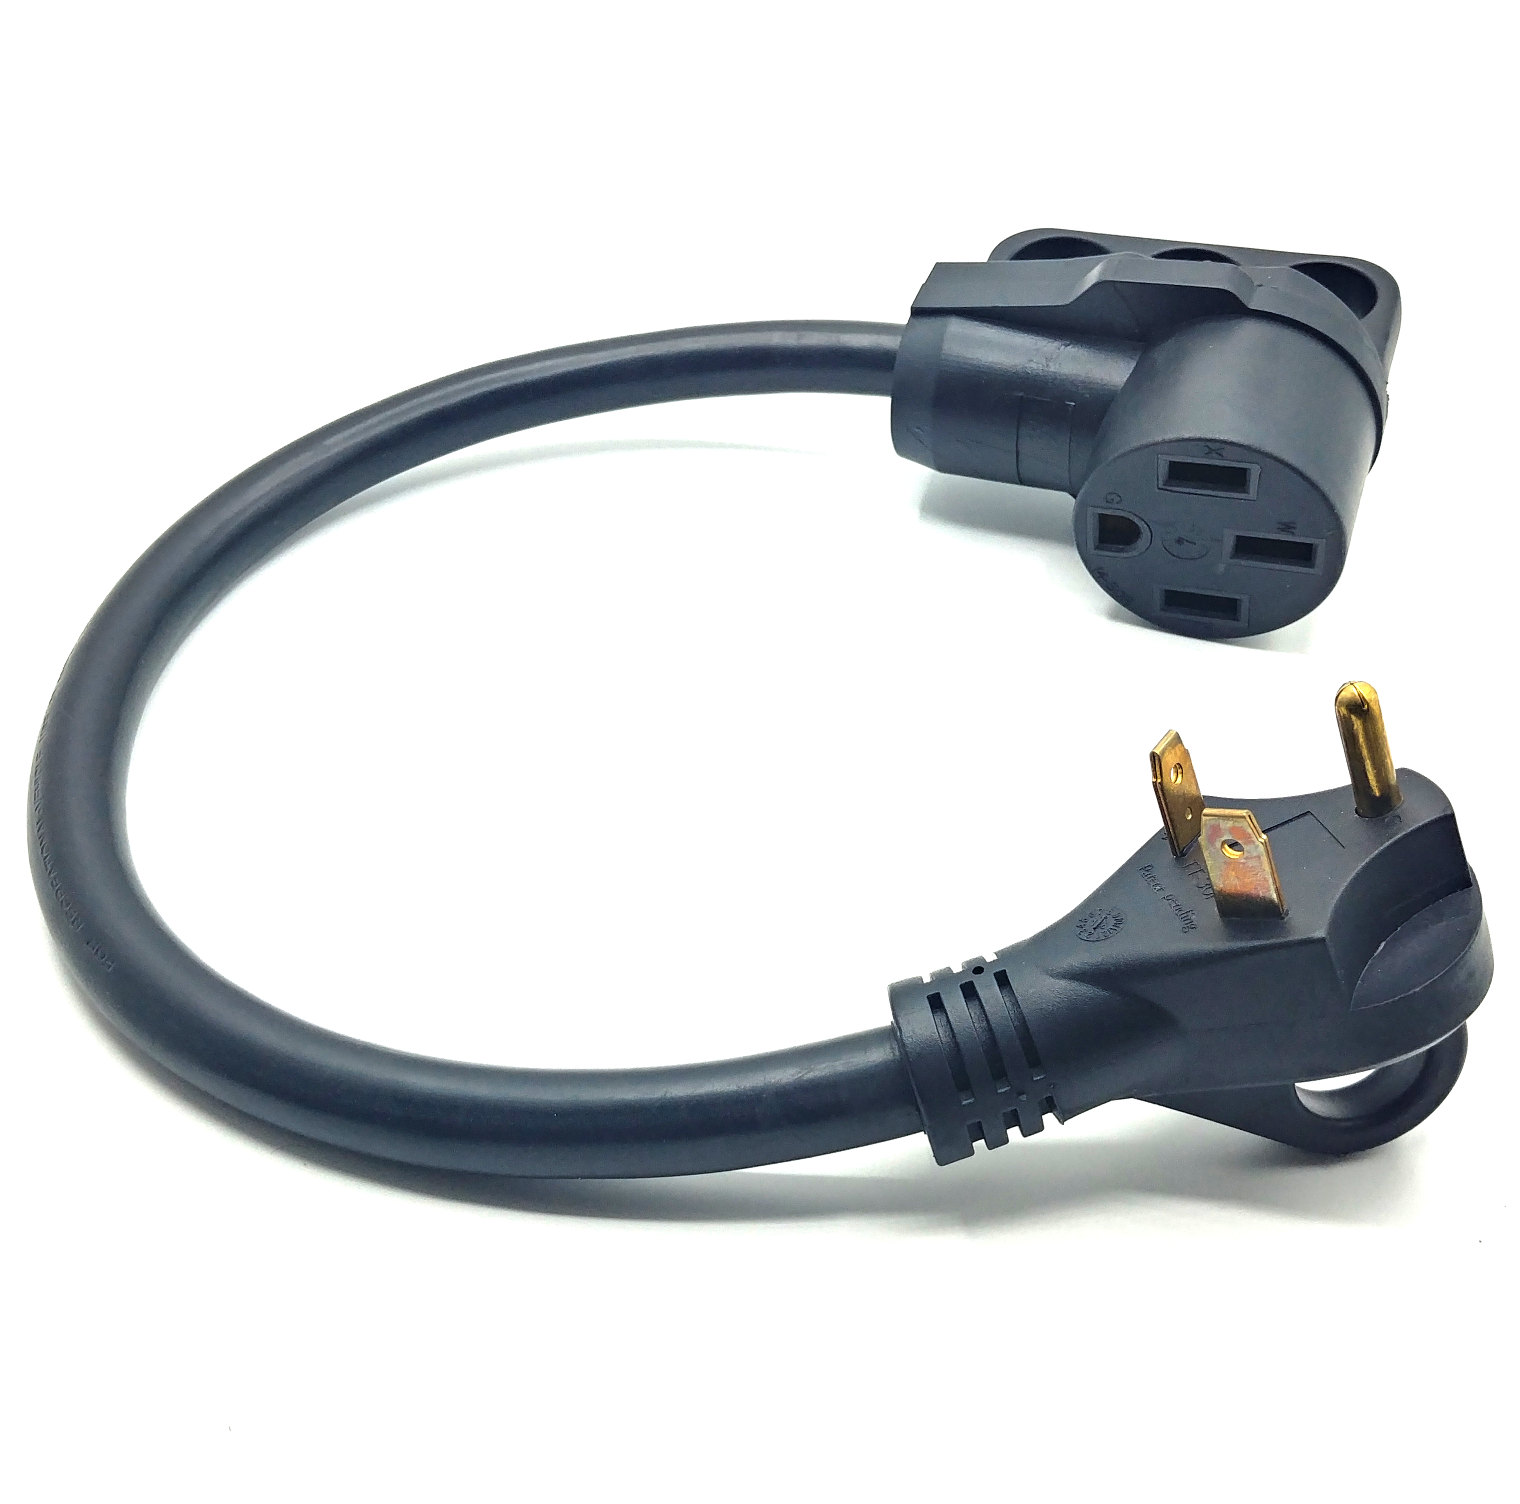 I LITTON 14-30P to 14-50R EV Charger Adapter from Dryer to Tesla or EV Charing NEMA 14-30P to NEMA 14-50P for EV Charging at Home Level 2 Charging 18inch 